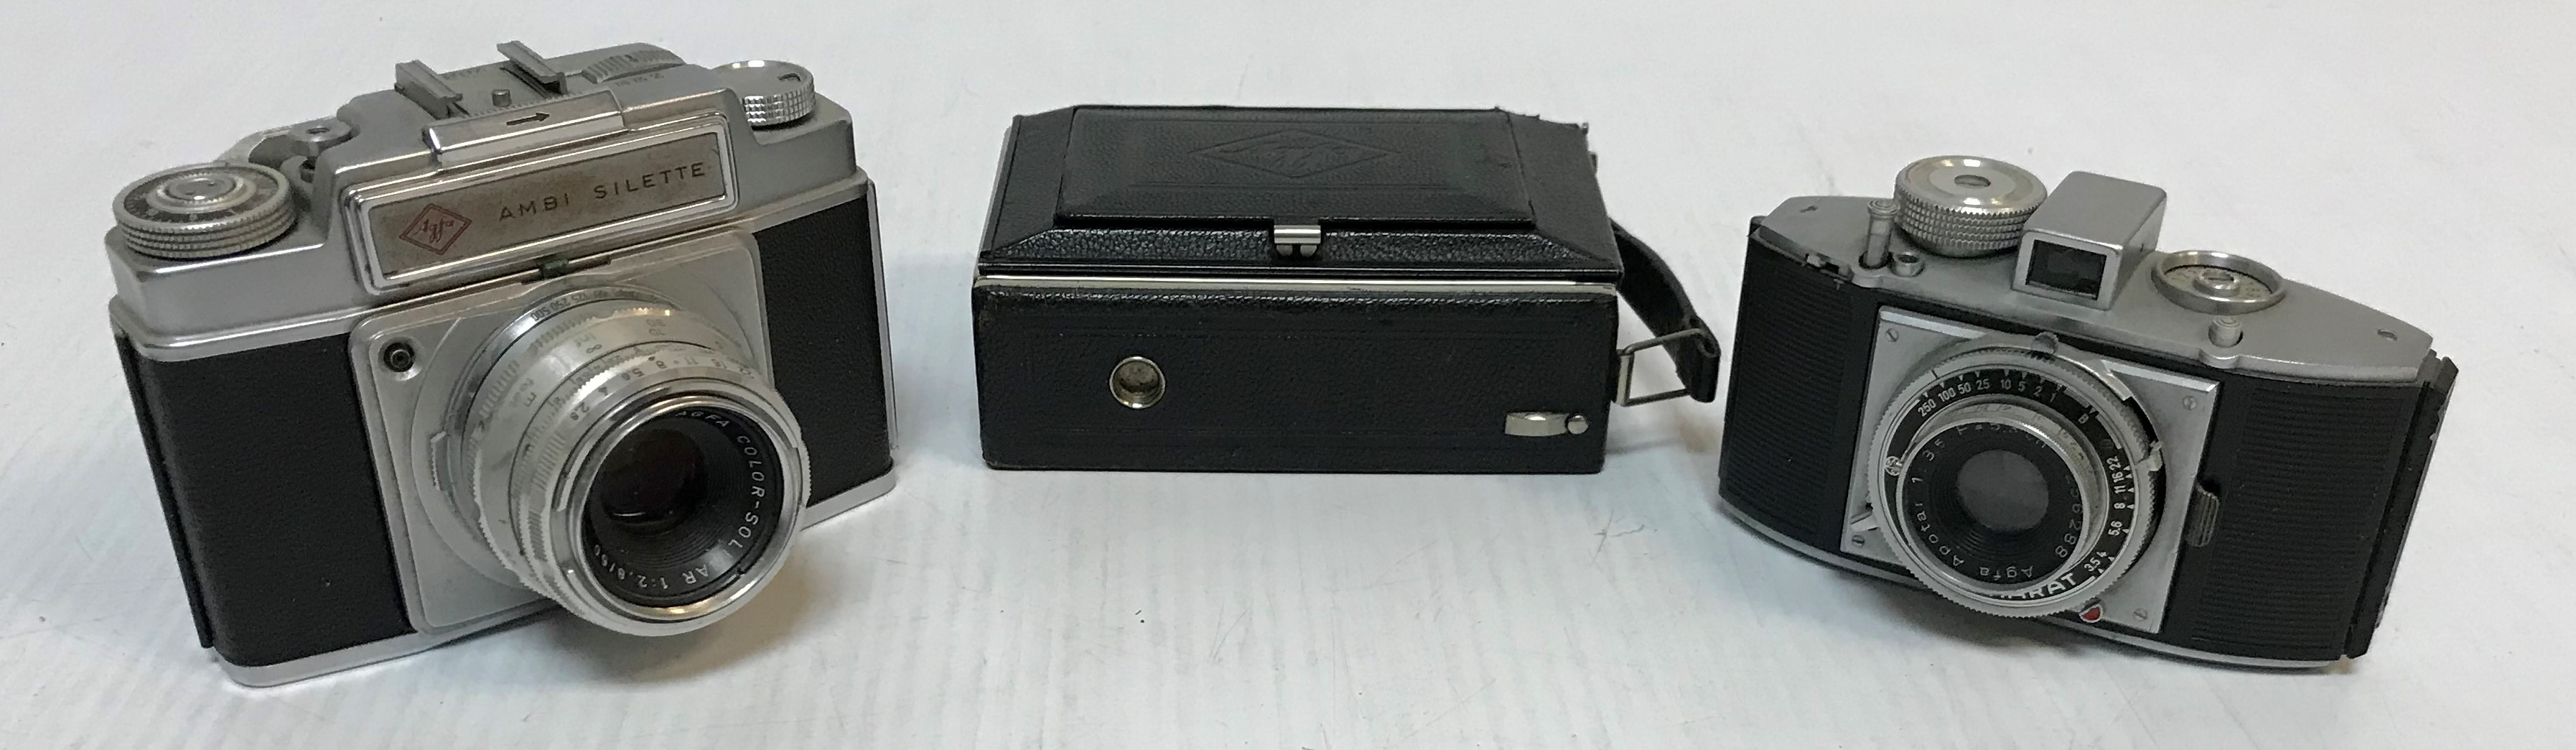 A collection of six various vintage Agfa cameras including an Ambi Silette, an Agfa Karat, - Image 4 of 6